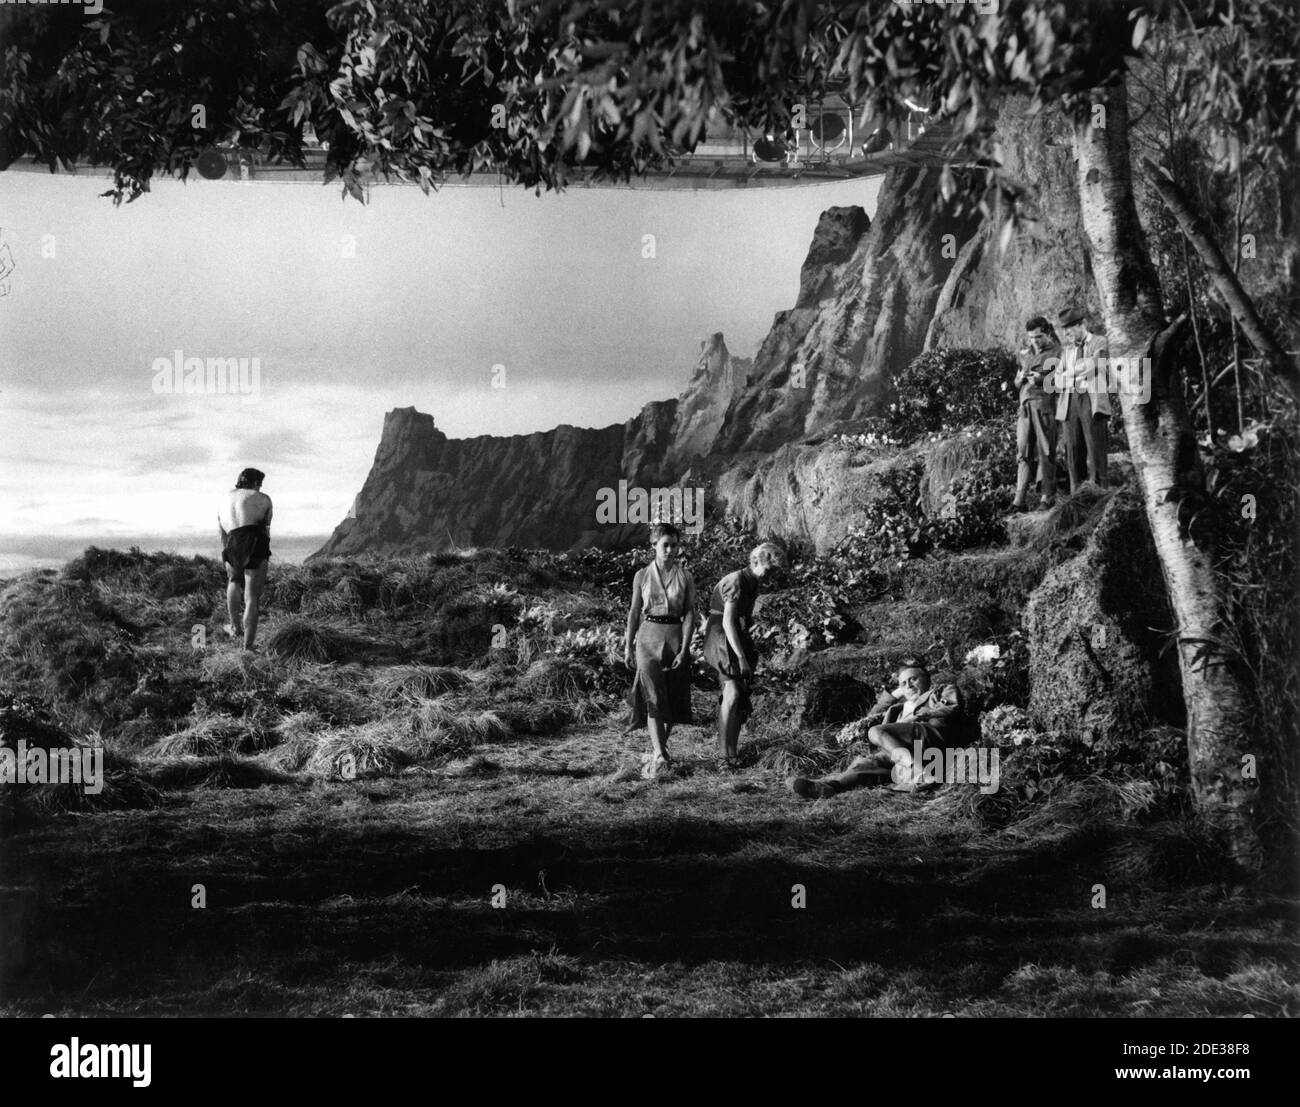 GORDON SCOTT BETTA ST. JOHN YOLANDE DONLAN GEORGE COULOURIS PETER ARNE and WILFRID HYDE-WHITE on set candid during filming of TARZAN AND THE LOST SAFARI 1957 director H. BRUCE HUMBERSTONE based on characters created by Edgar Rice Burroughs production design Paul Sheriff Solar Film Productions - Metro Goldwyn Mayer Stock Photo